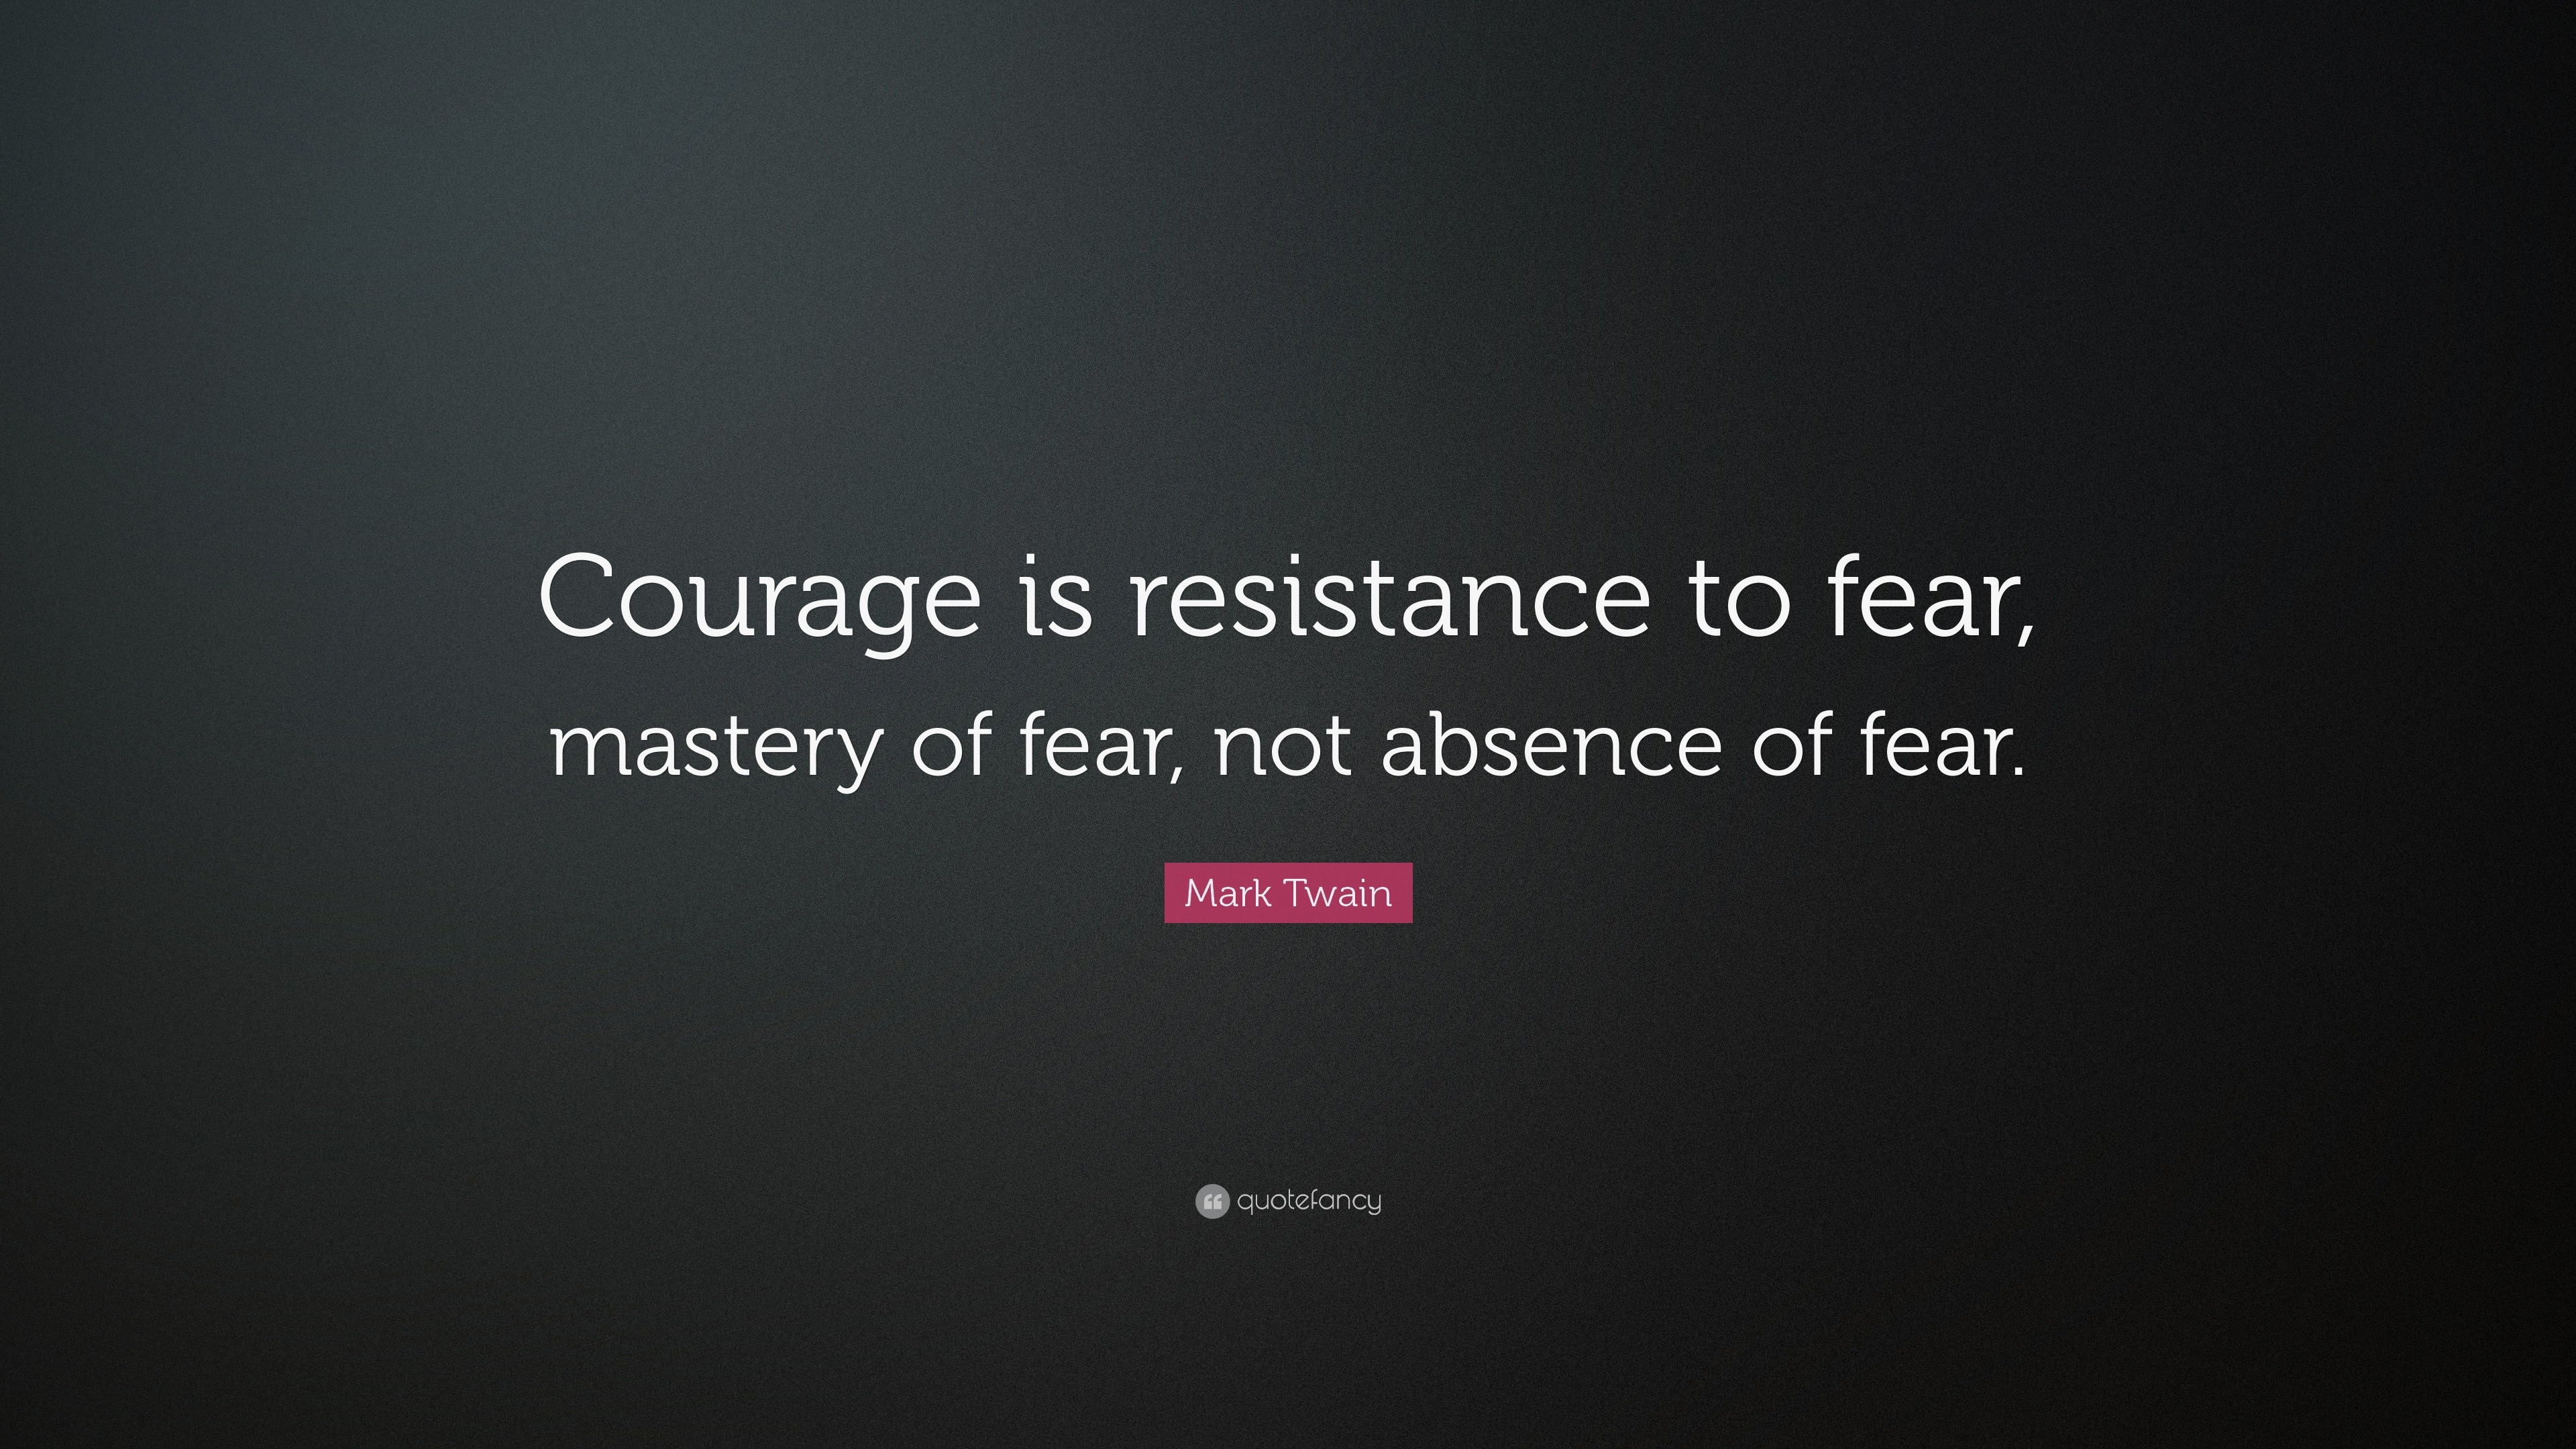 NEW POSTER Classroom Motivational Courage is Resistance to Fear.. Mark Twain 